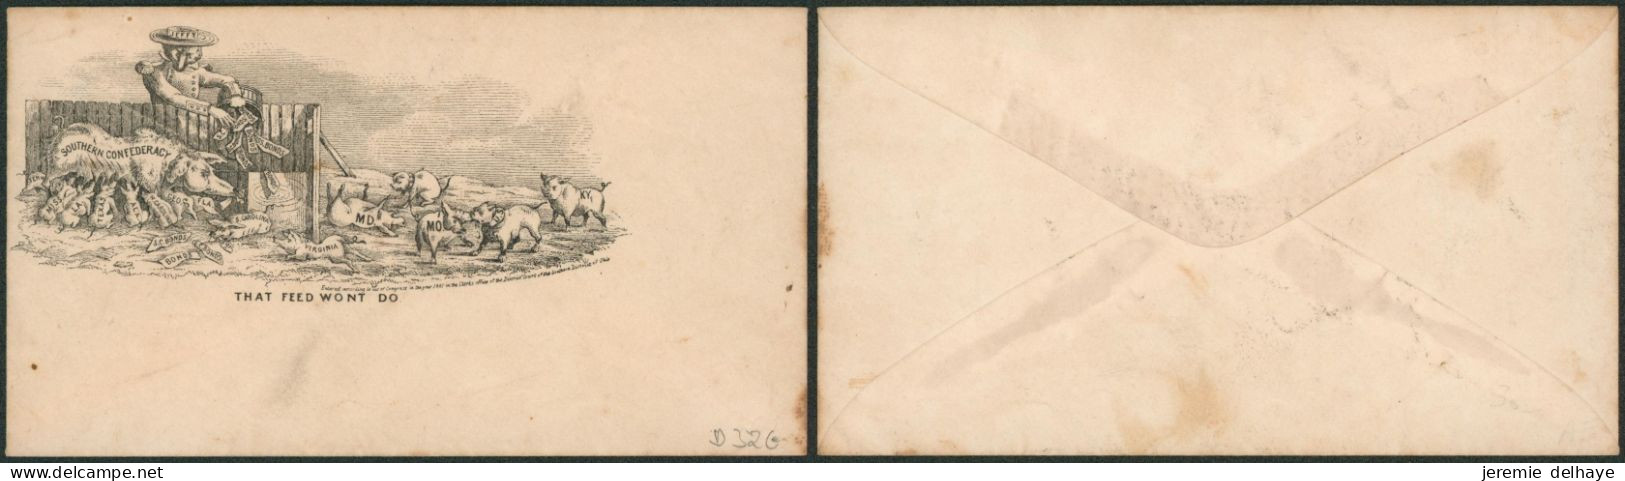 Grande Bretagne - Private Caricature (Southern Confederacy, Pigs, Dogs, USA). Postage Envelope Unused. TB - 1840 Mulready Envelopes & Lettersheets